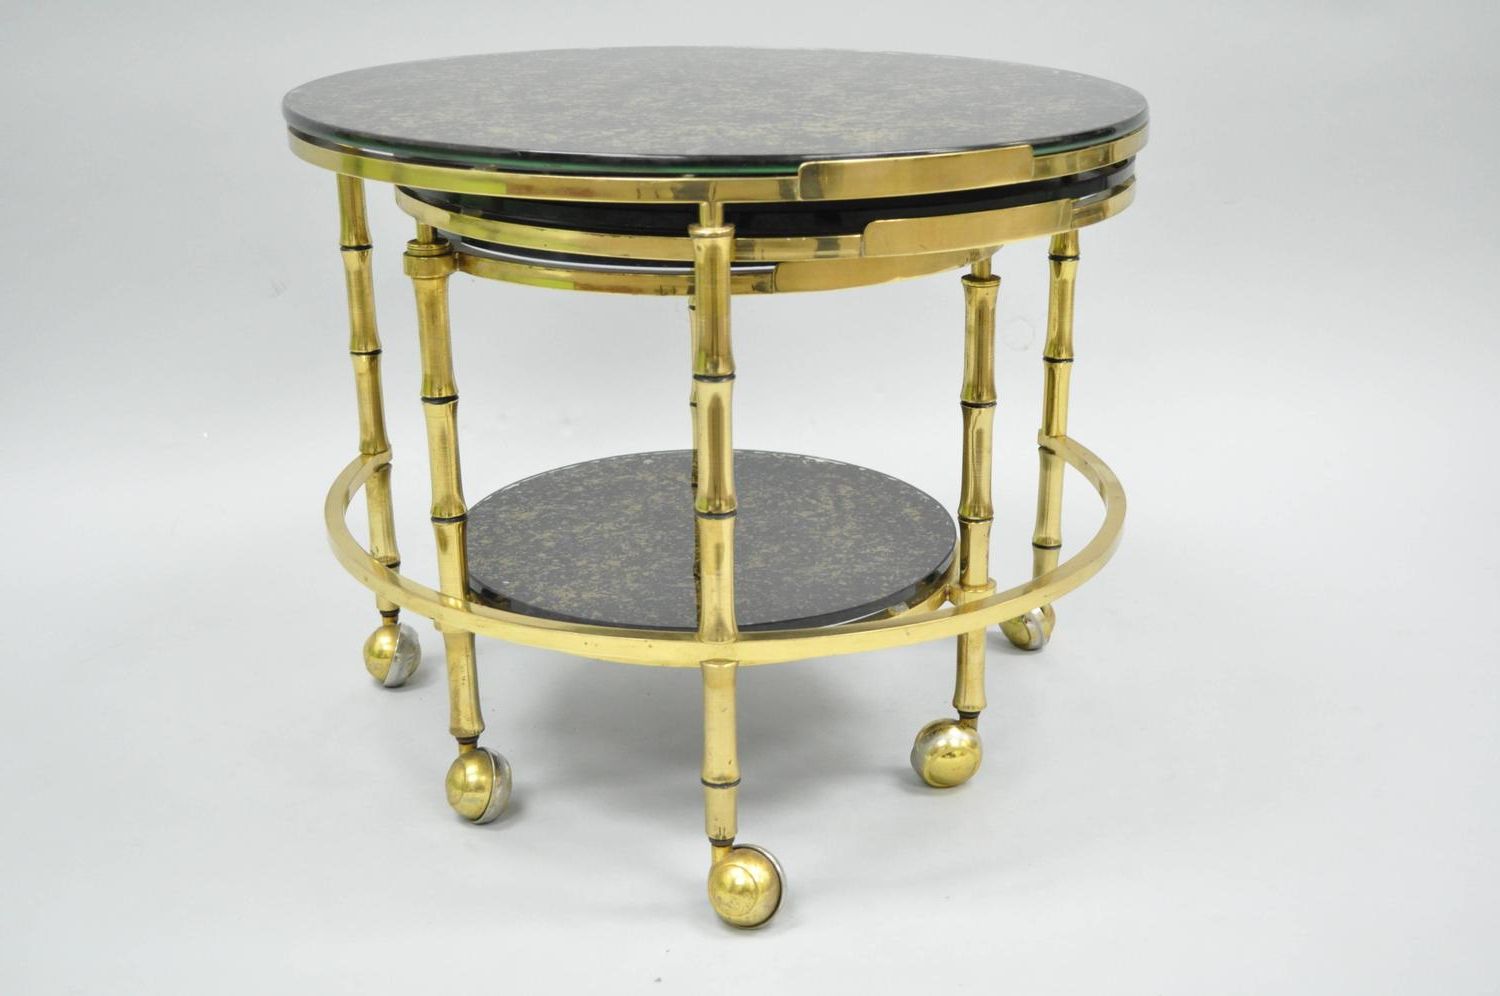 Solid Brass And Gold Flecks Glass Faux Bamboo Nesting Regarding Most Recently Released Antique Gold Nesting Coffee Tables (View 19 of 20)